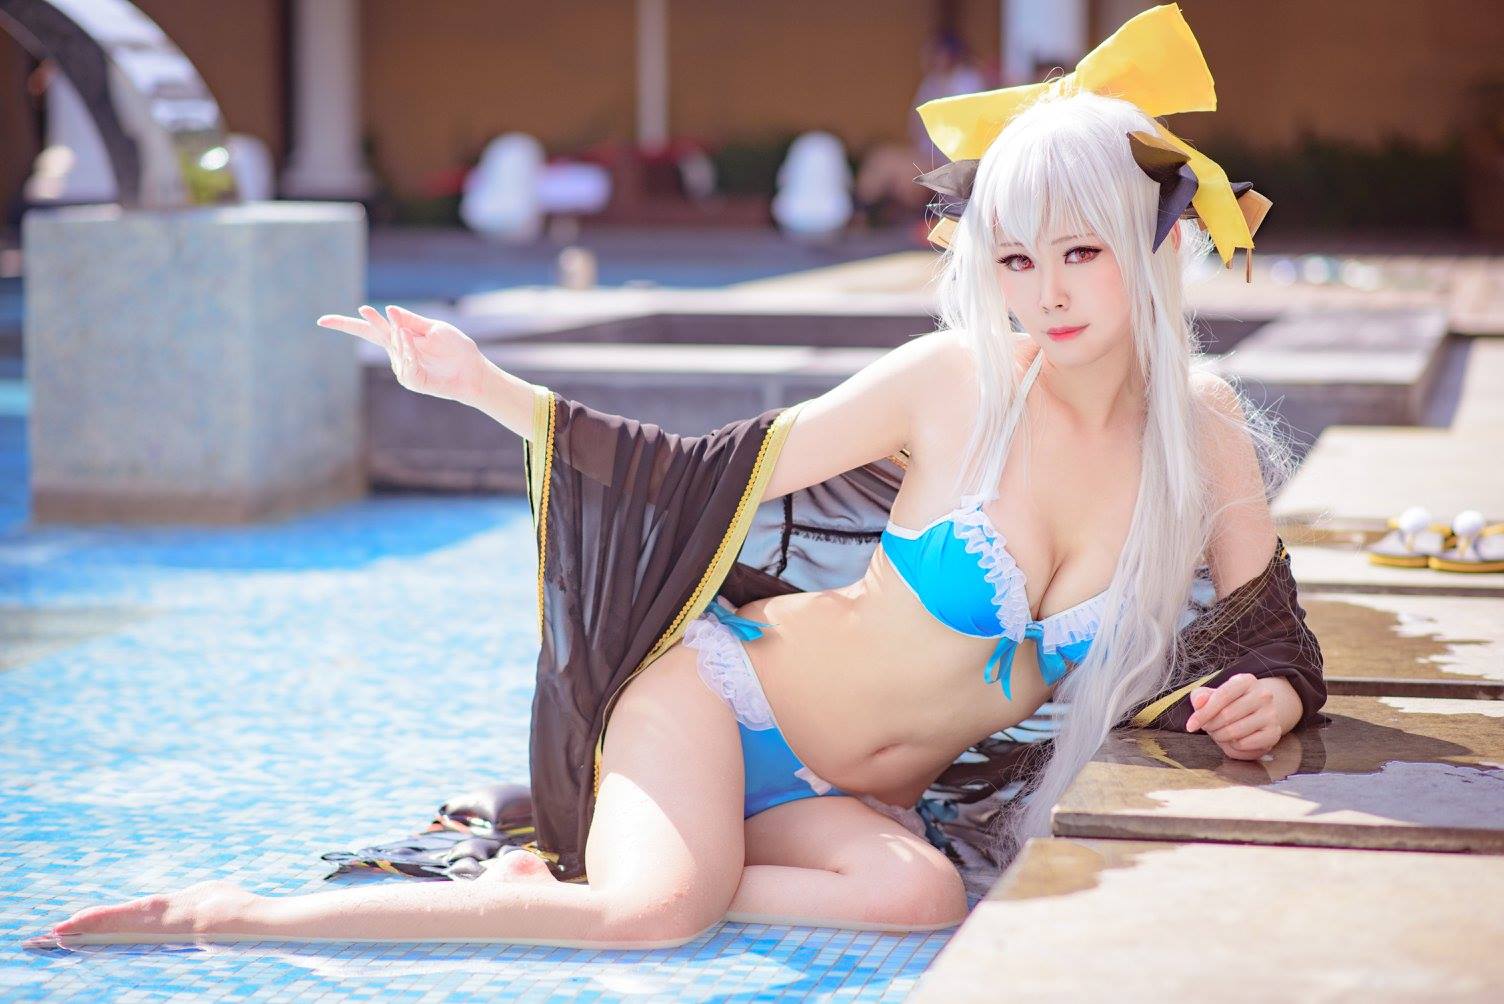 Arty as Kiyohime from 'Fate/Grand Order'| Arty from Taiwan | MANGA.TOKYO World Cosplayers | Artyさん／『Fate/Grand Order』清姫